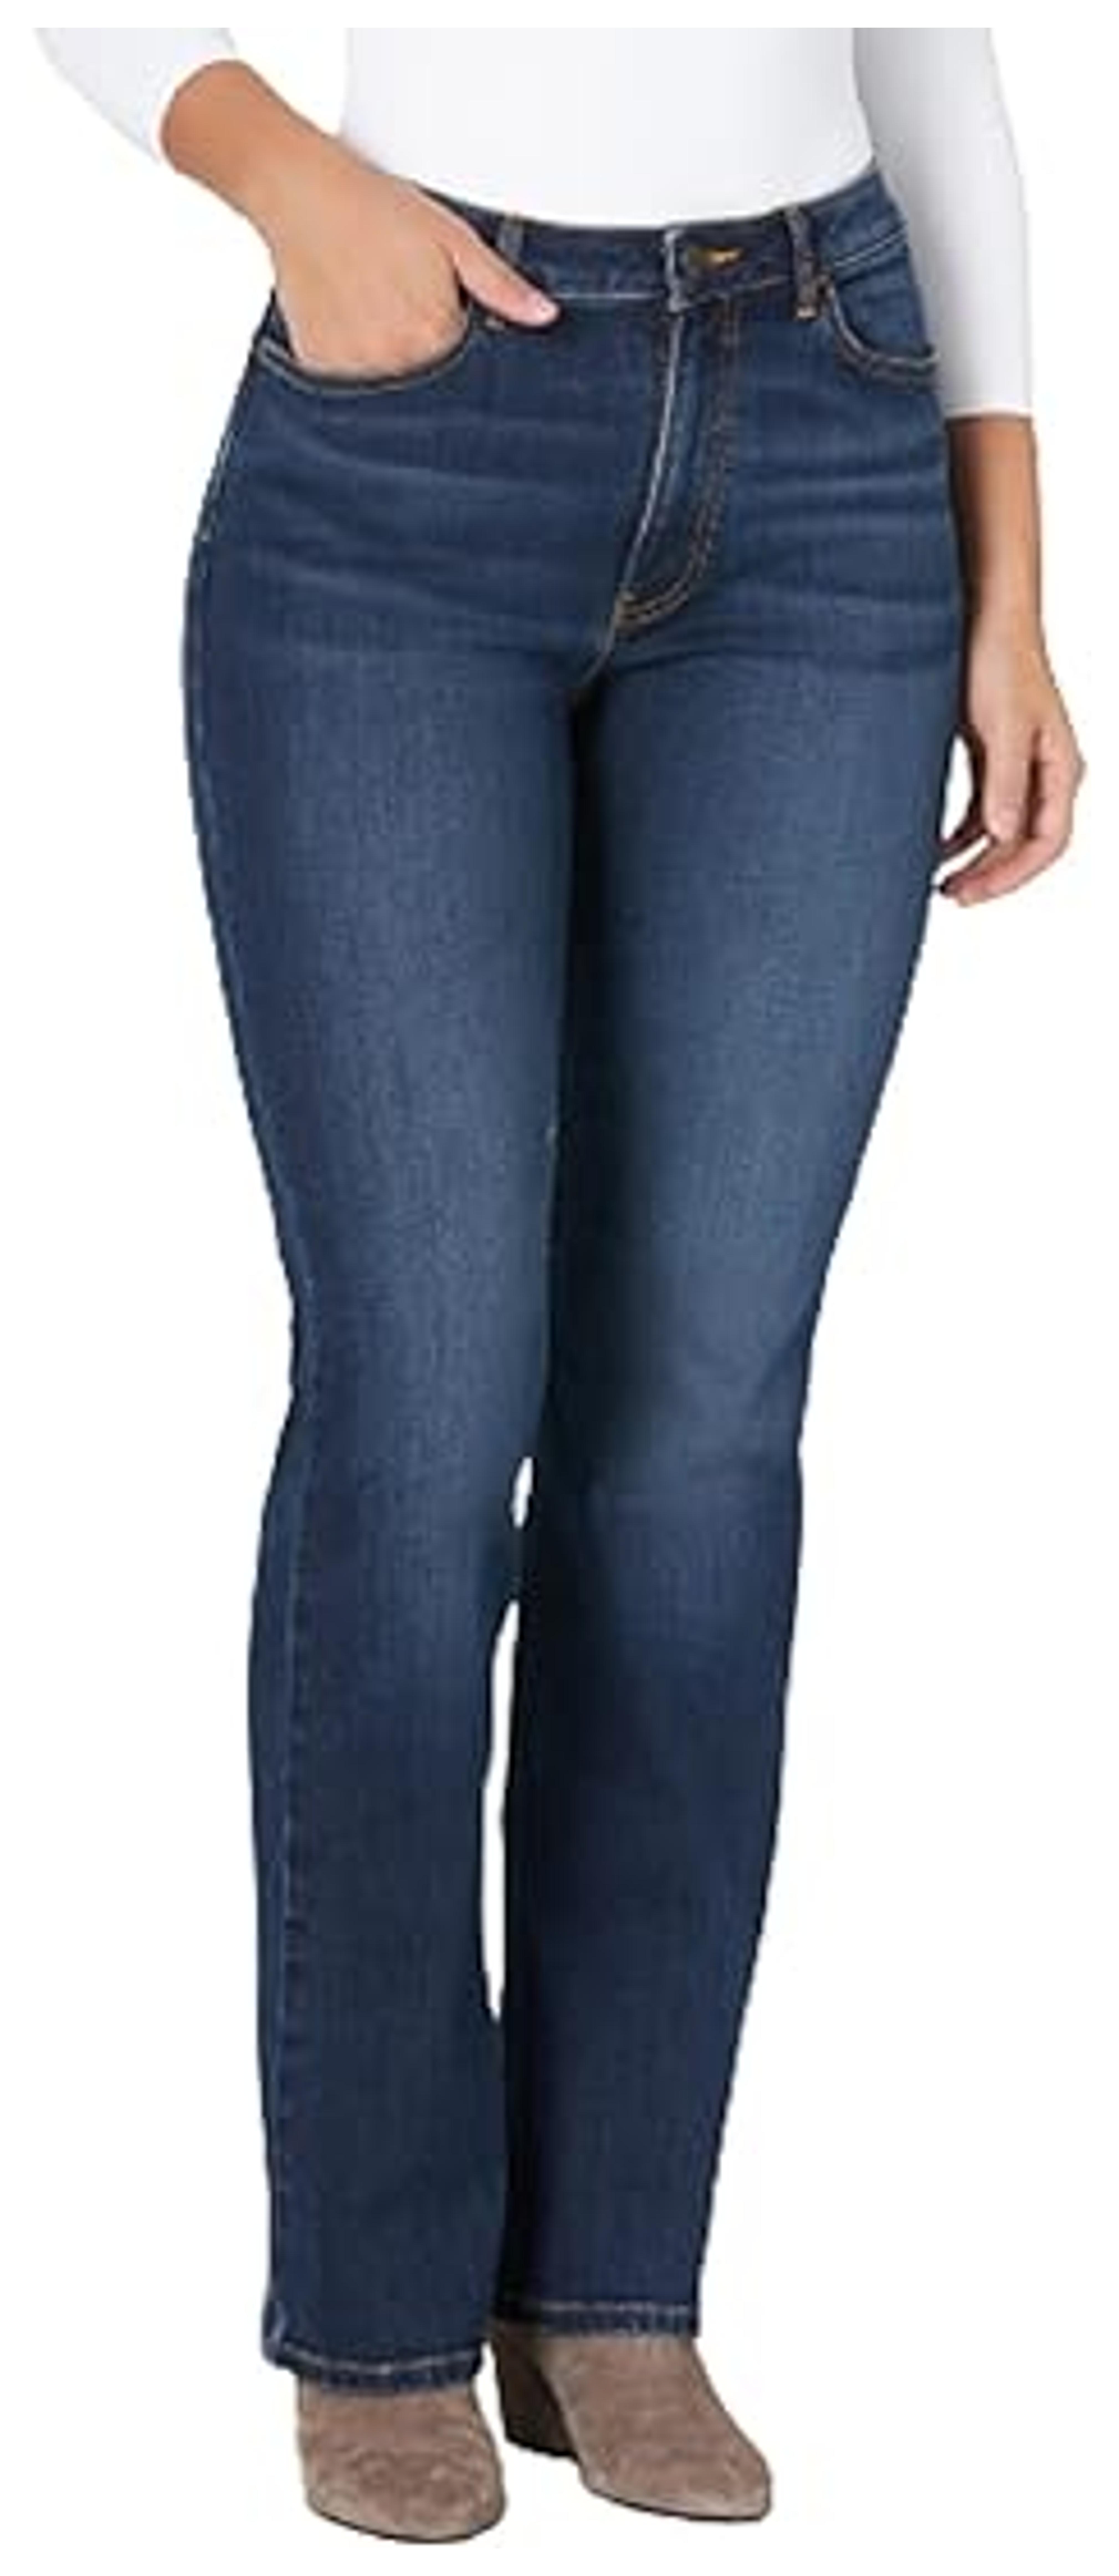 Wrangler womens High Rise True Straight Fit Jeans, Stockton, 18-32 US at Amazon Women's Jeans store